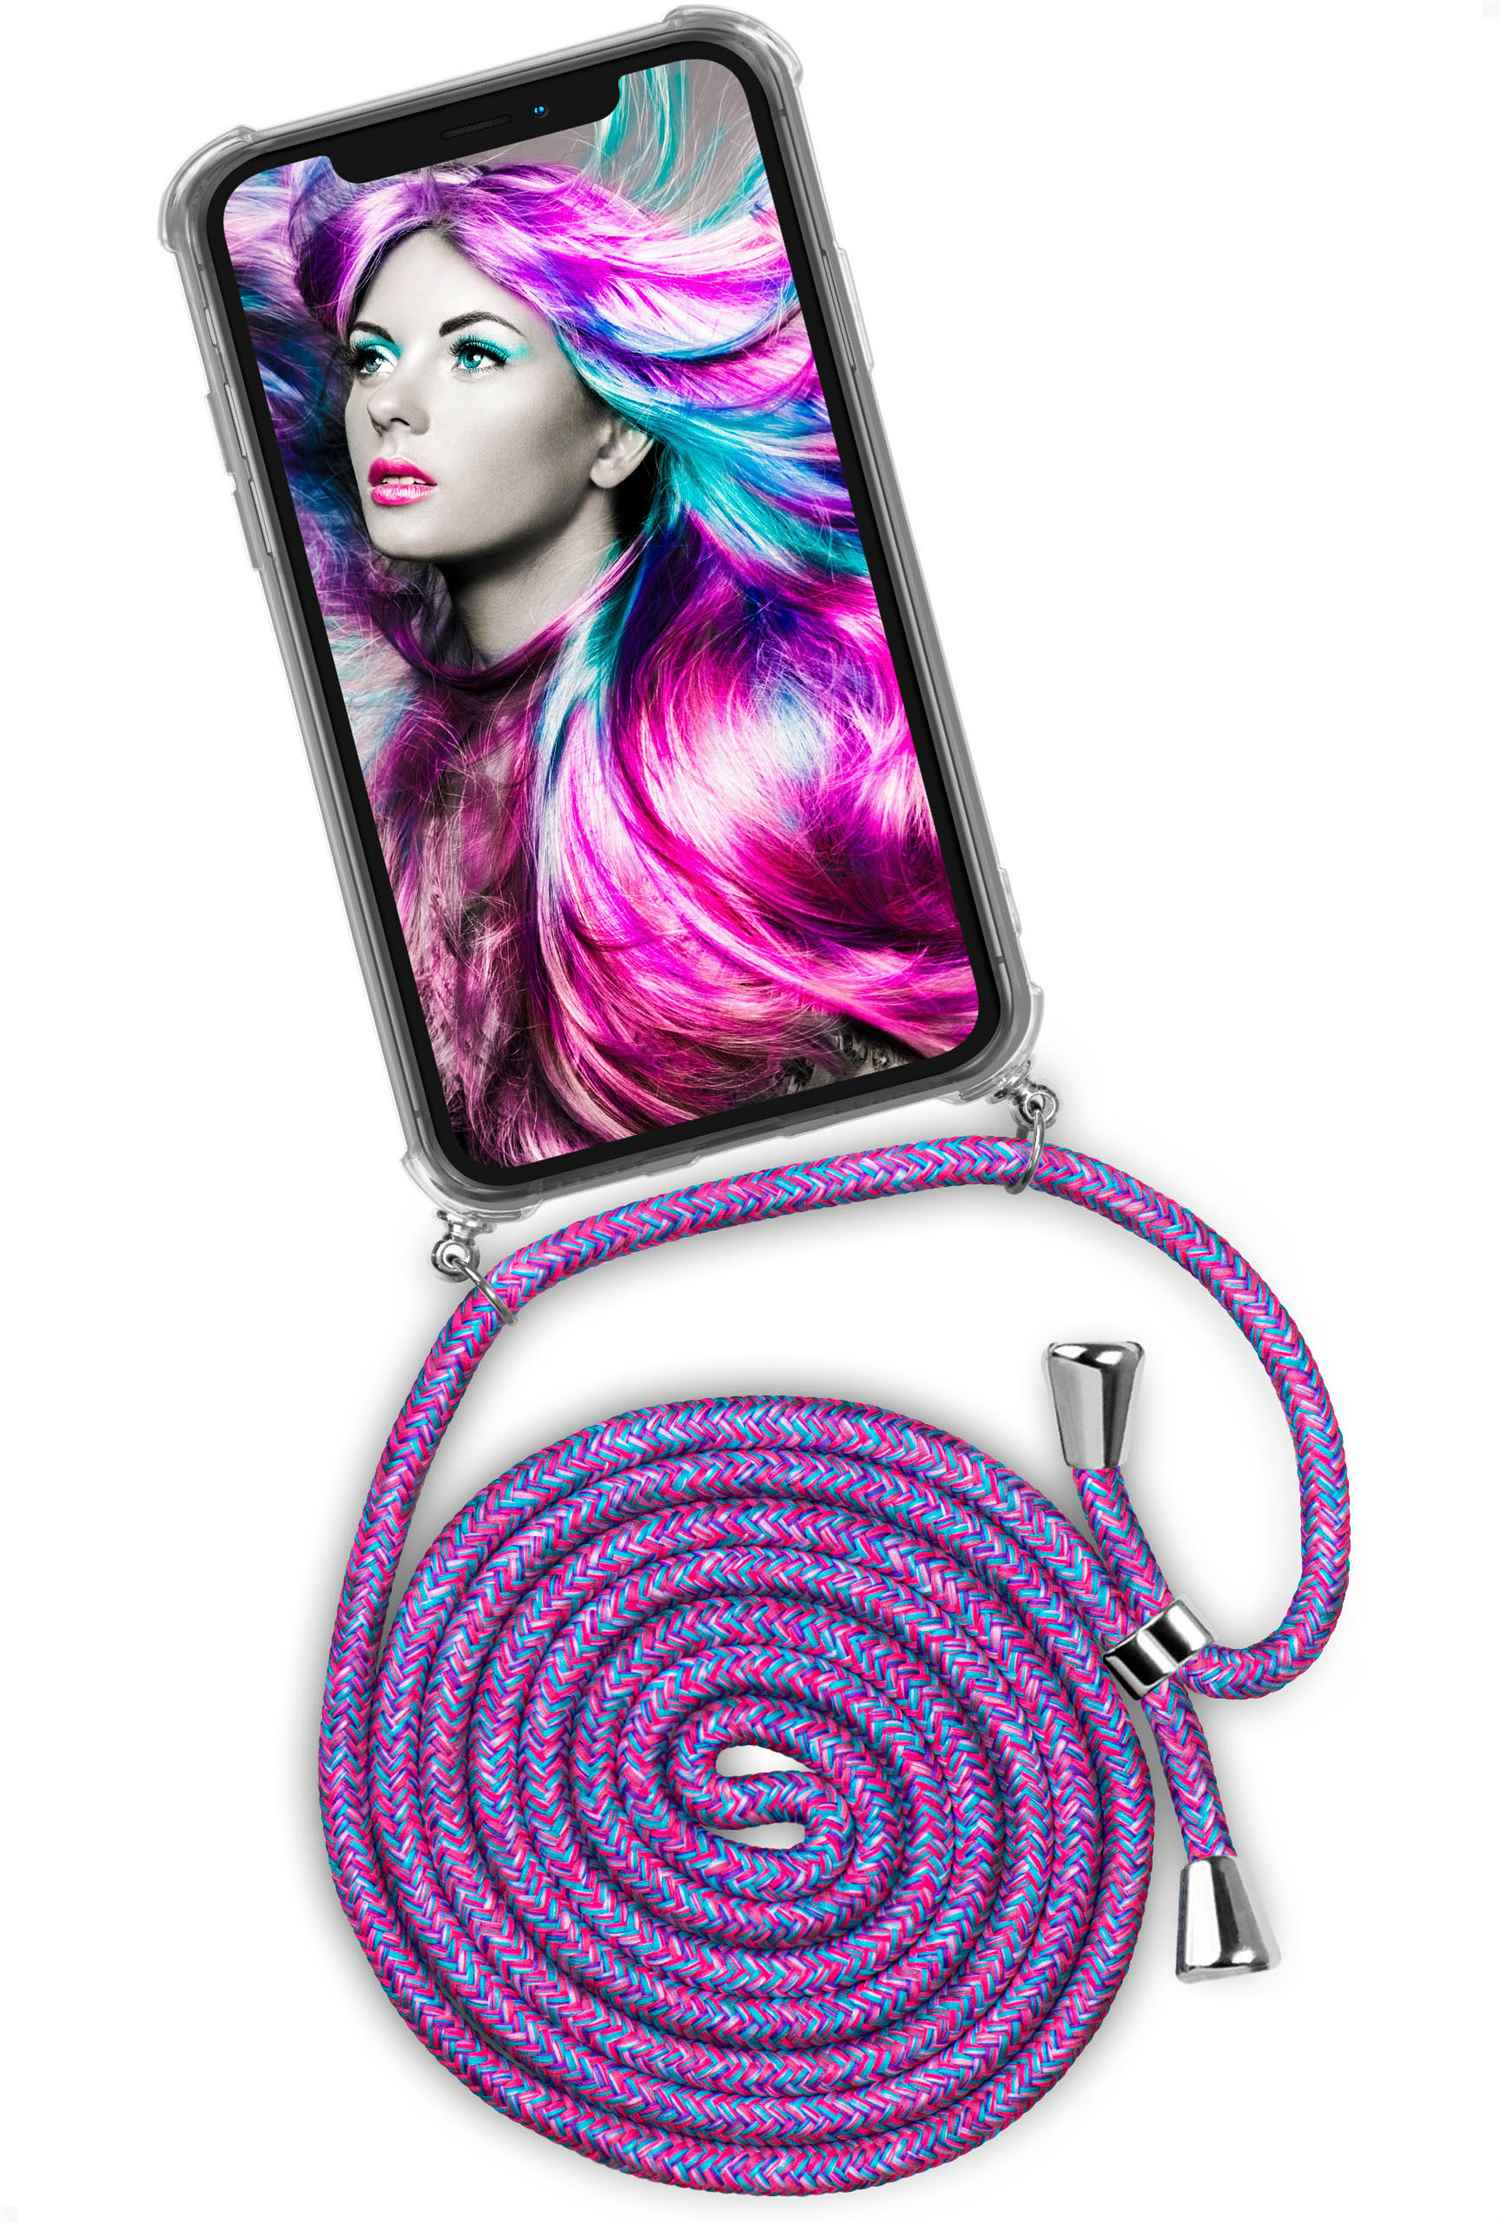 Pro 12 Max, (Silber) ONEFLOW iPhone Case, Crazy Twist Apple, Unicorn Backcover,